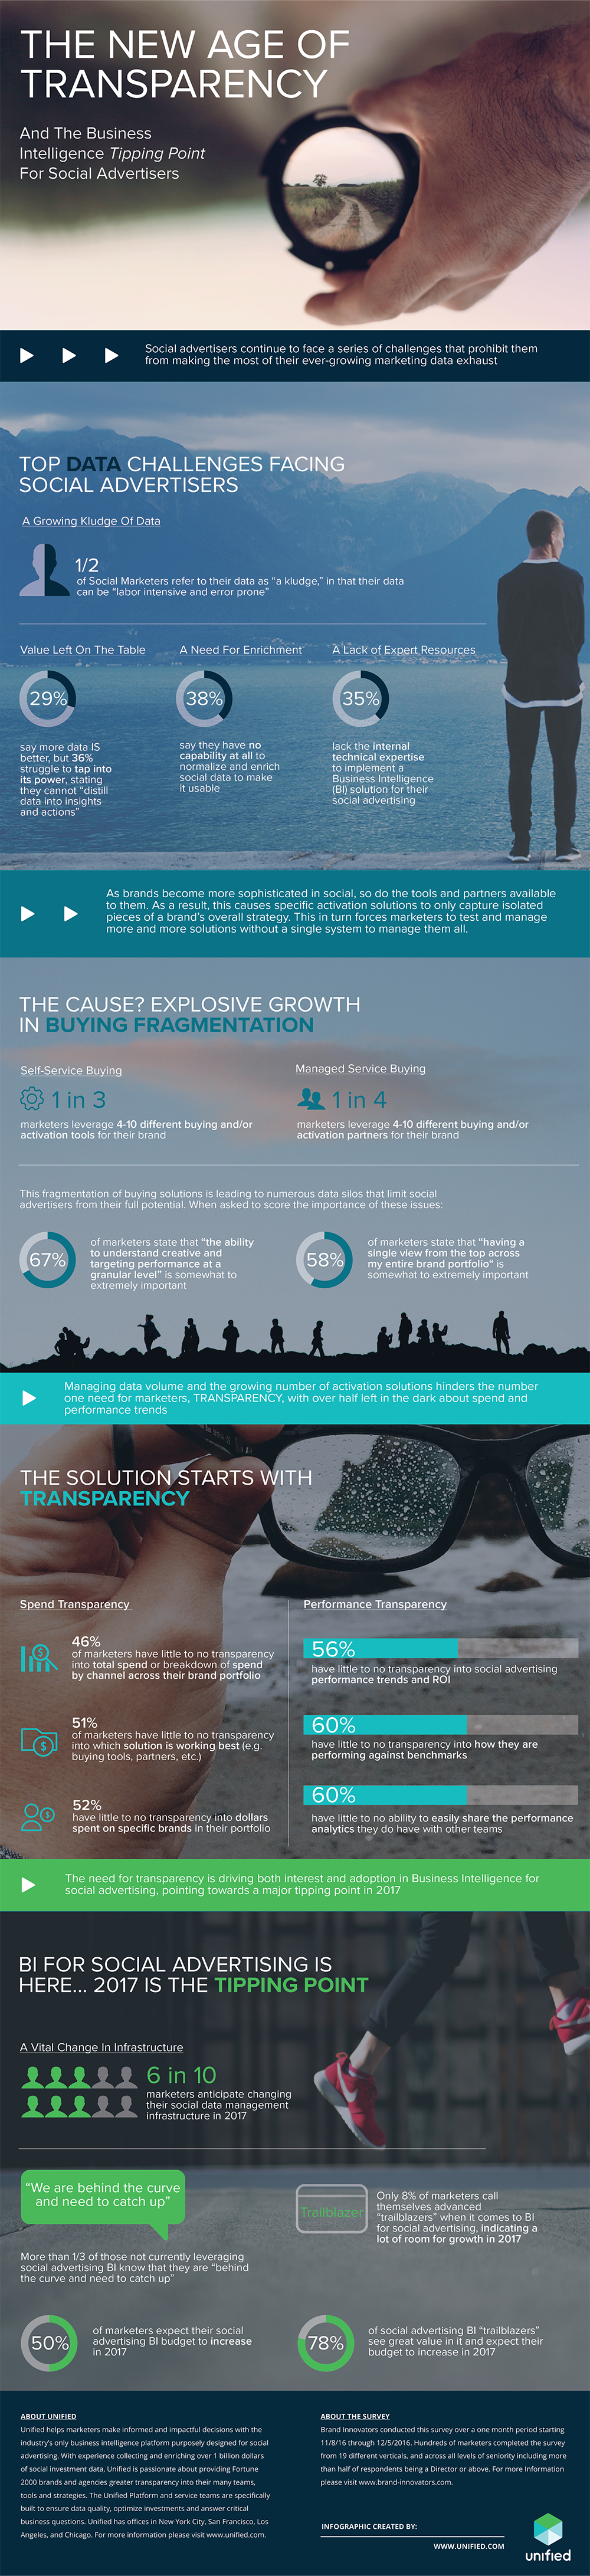 The New Age Of Transparency And The Business Intelligence Tipping Point For Social Advertisers [Infogrphic]